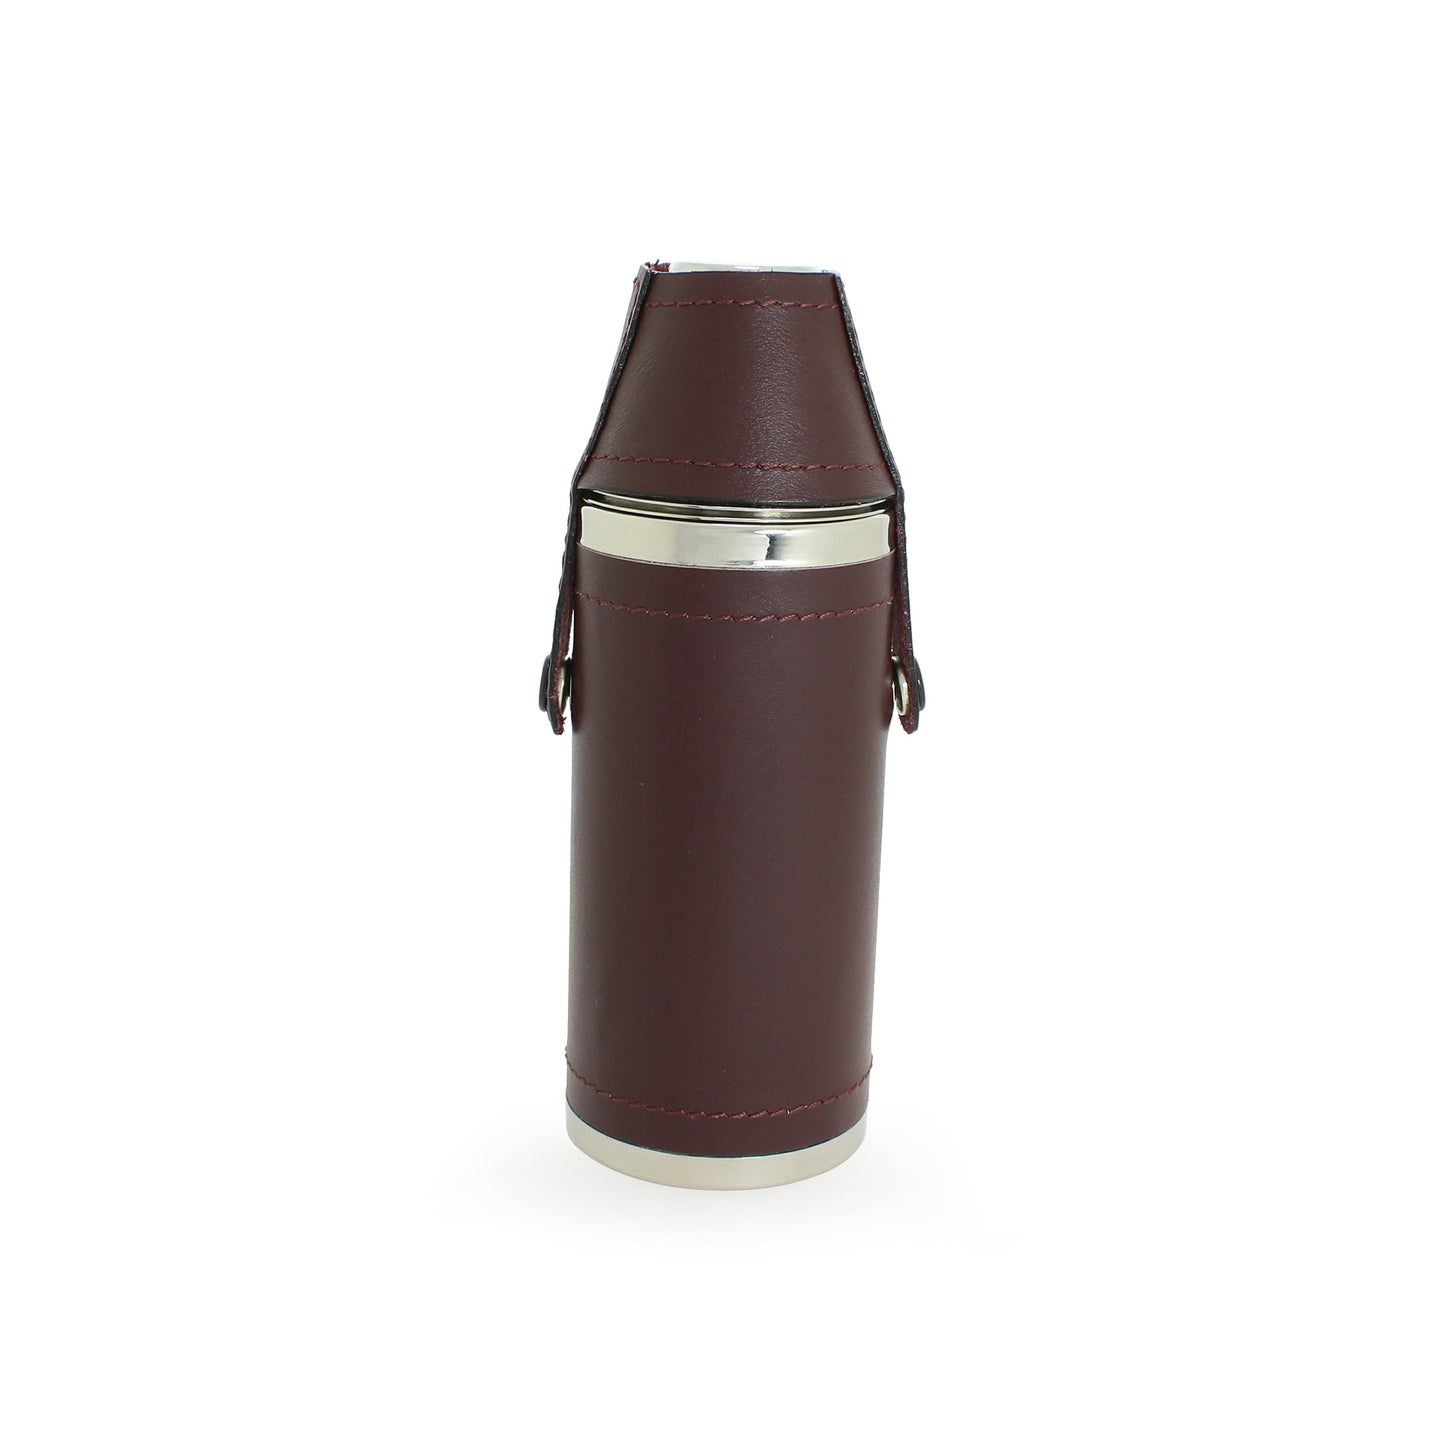 8oz Stainless Steel Hunting Flask with Nip Cups Wrapped in Burgundy Leather